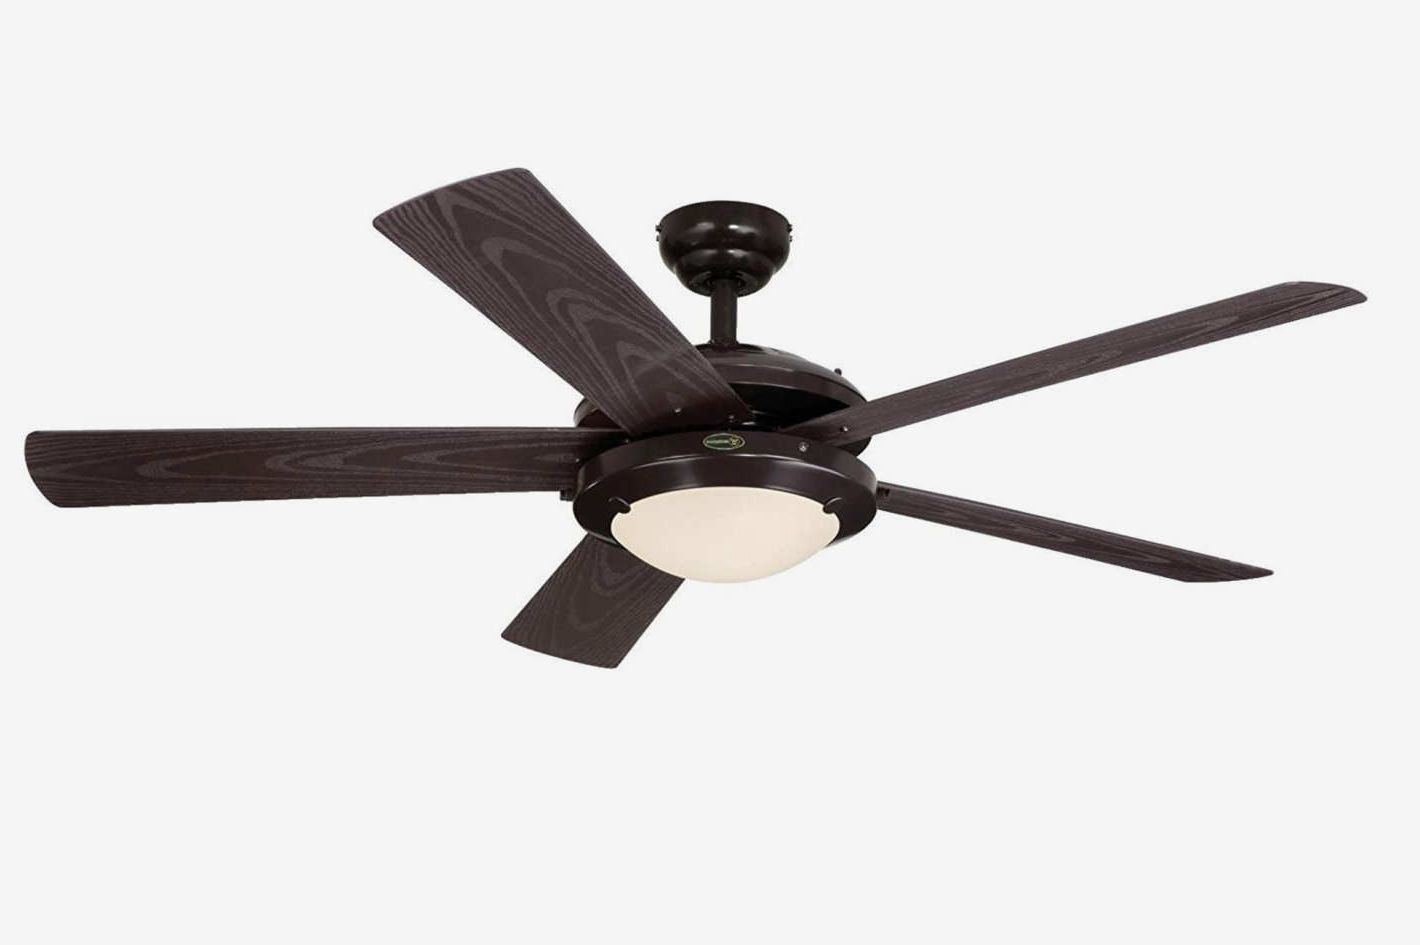 Widely Used The 9 Best Ceiling Fans On Amazon 2018 With Outdoor Ceiling Fans Under $ (View 6 of 20)